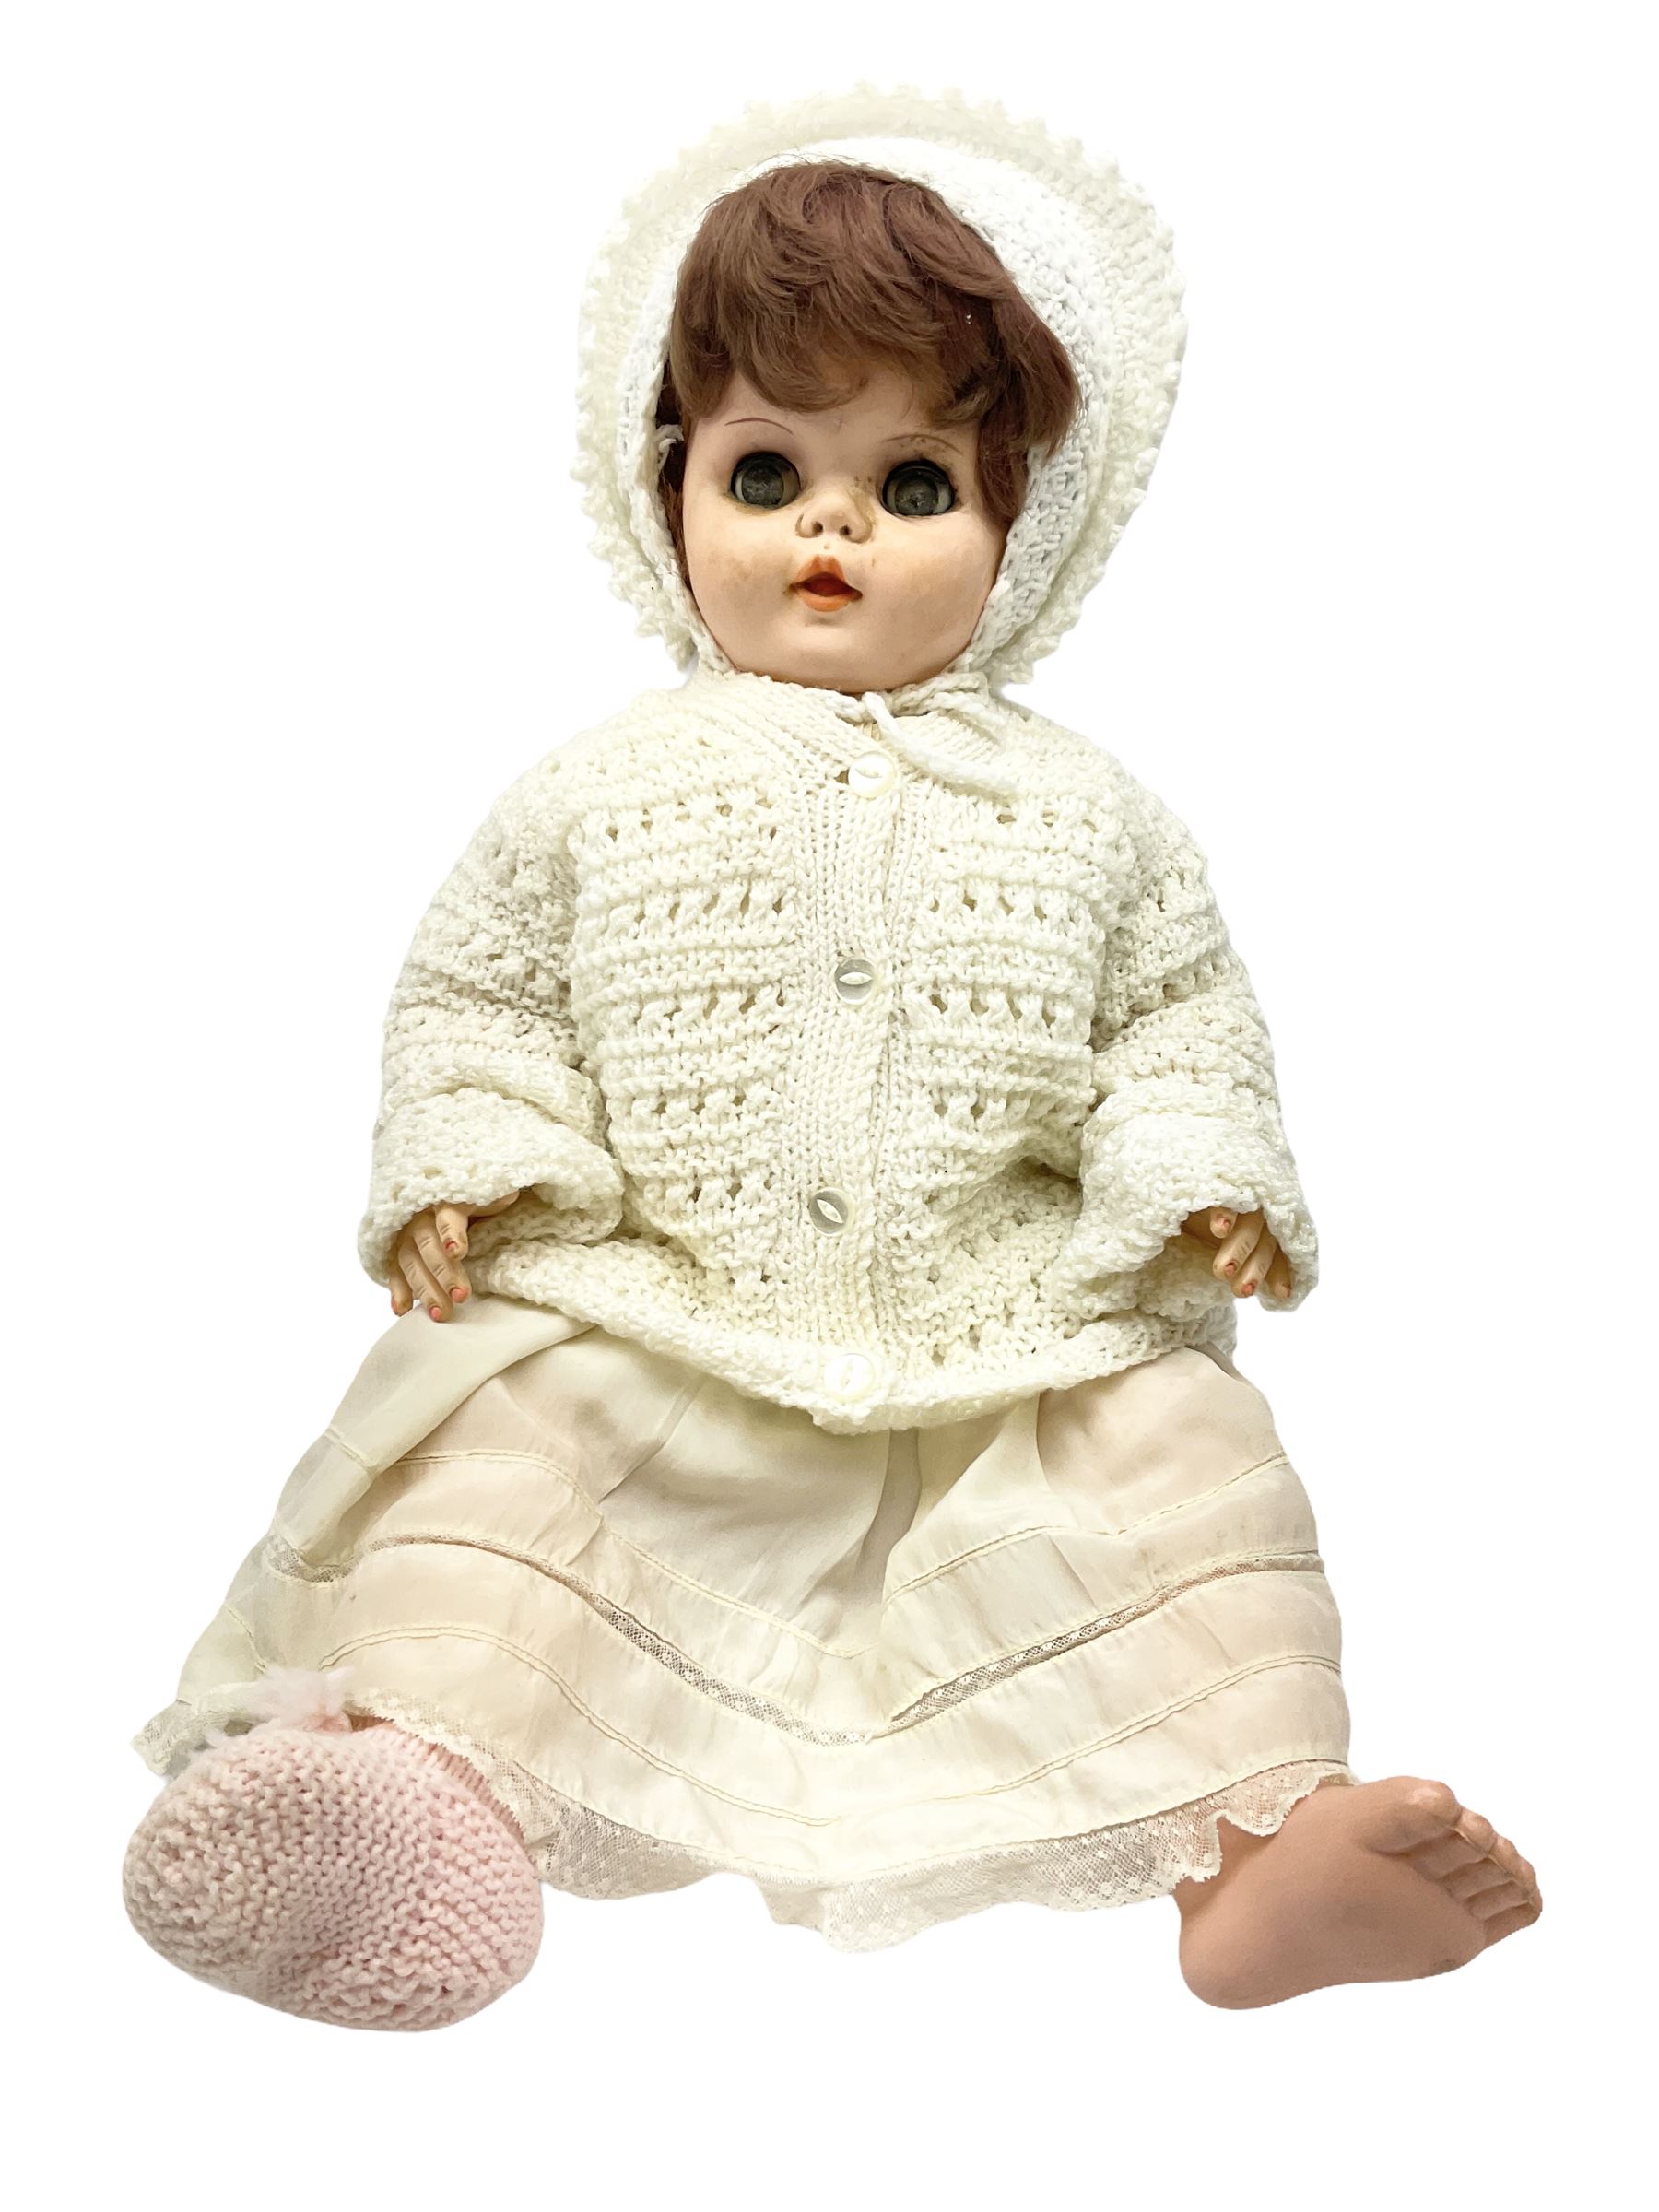 Simon & Halbig for Kammer & Reinhardt bisque head doll with applied hair - Image 3 of 11